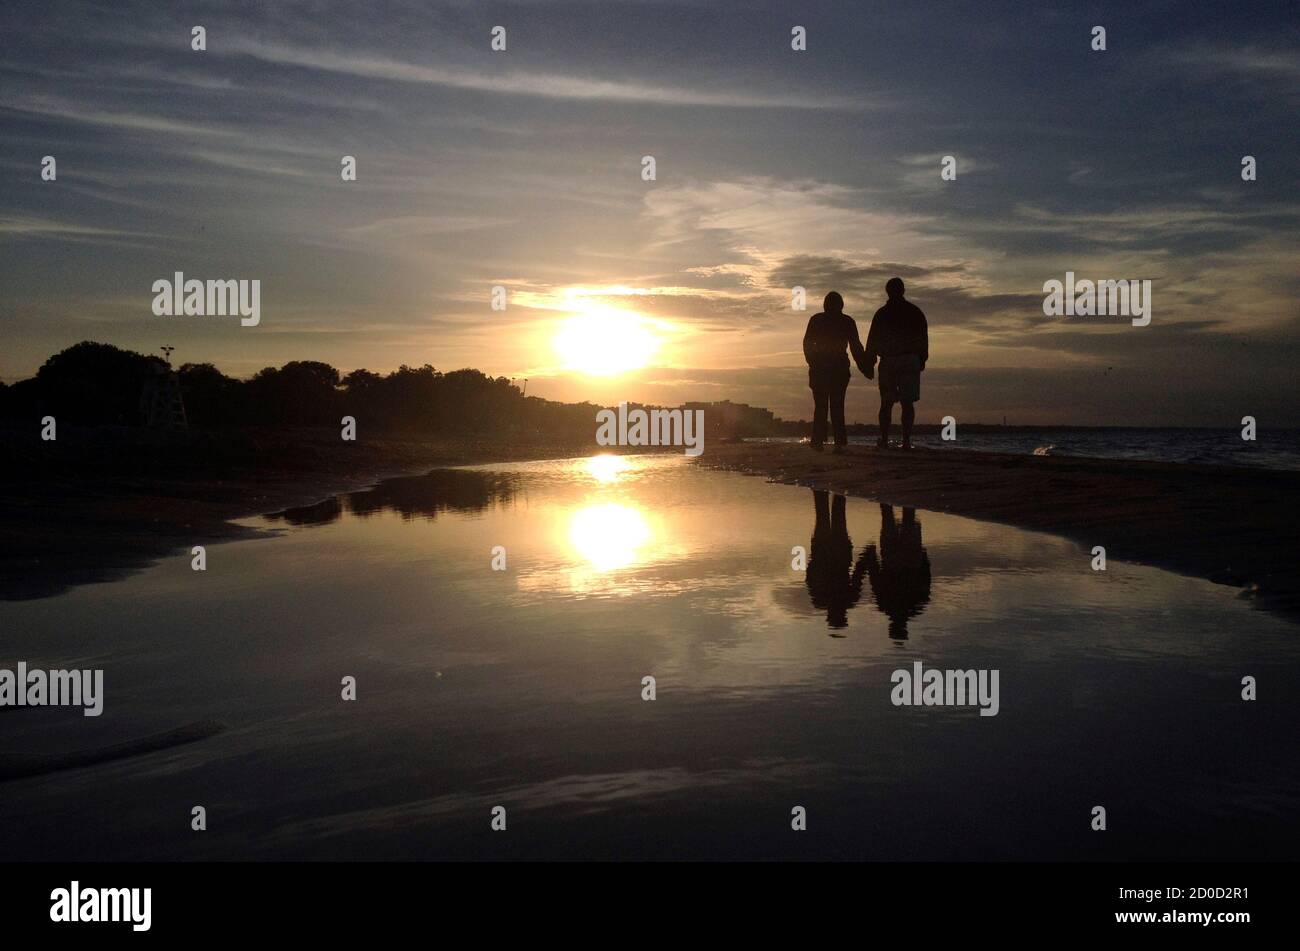 A couple walks along Gillson Beach holding hands as the sun sets in Wilmette, Illinois, June 14, 2014.  REUTERS/Jim Young (UNITED STATES - Tags: ENVIRONMENT SOCIETY) Stock Photo